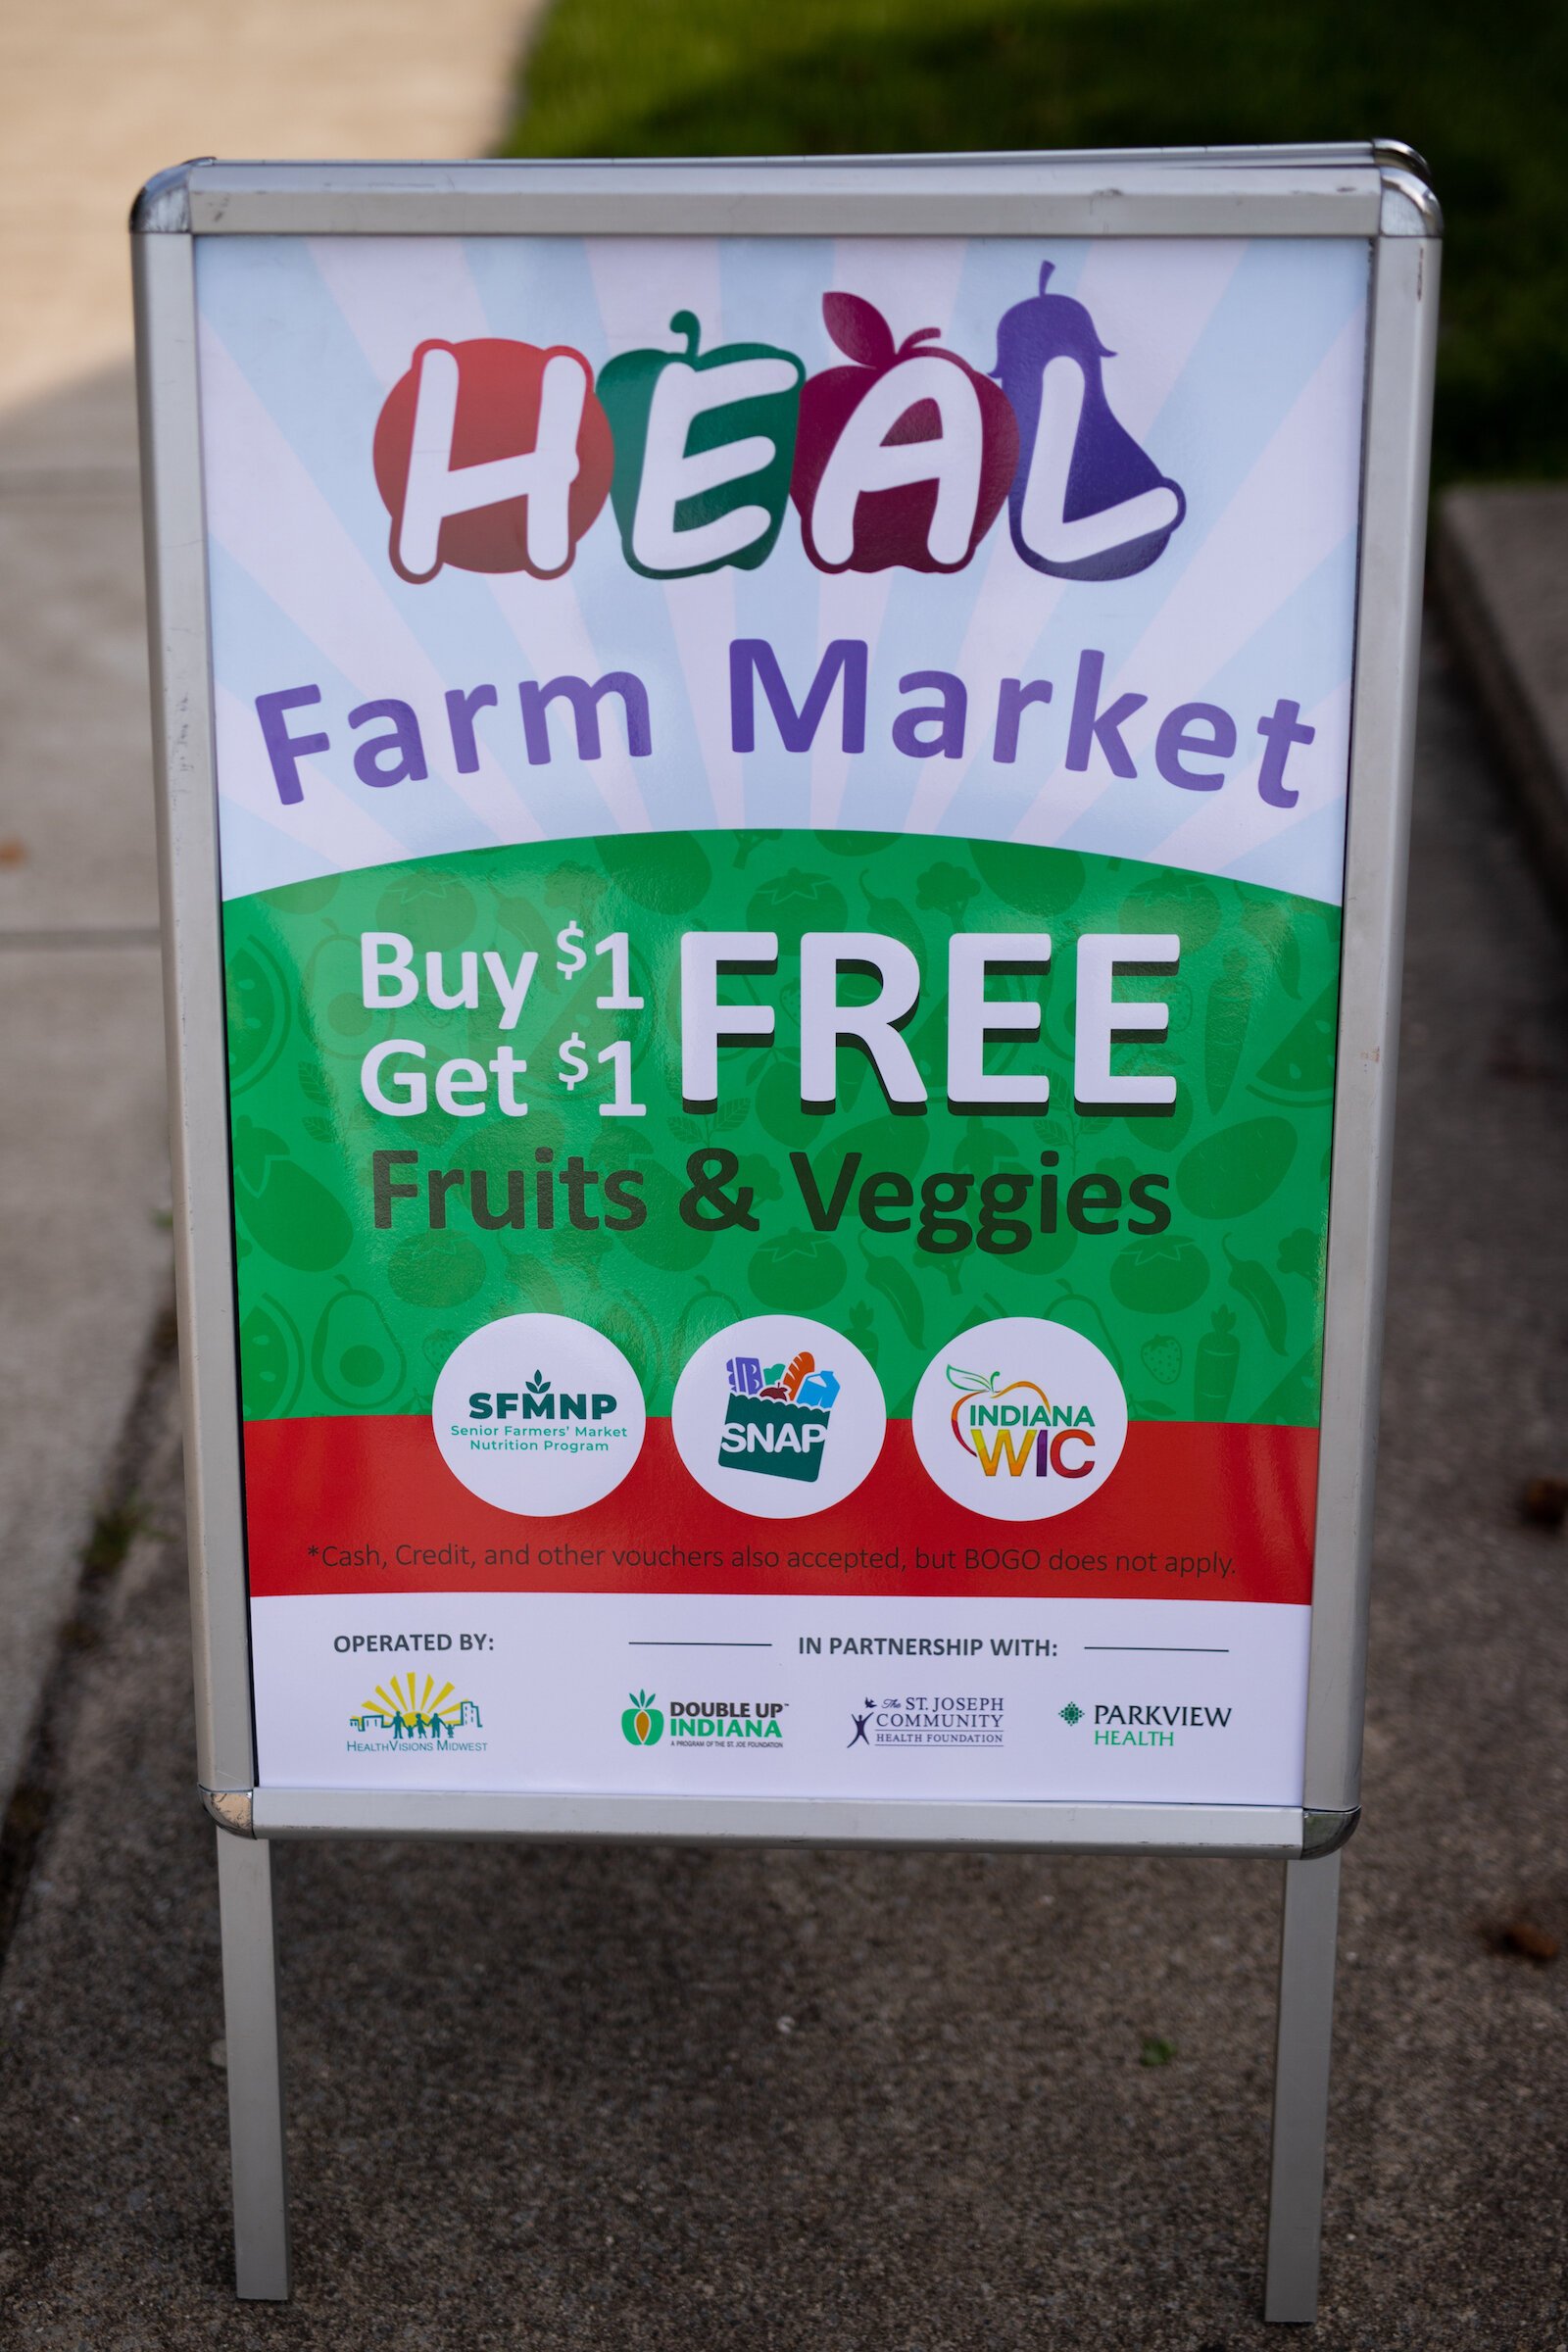 HEAL Farm Markets participate in the Double Up program.